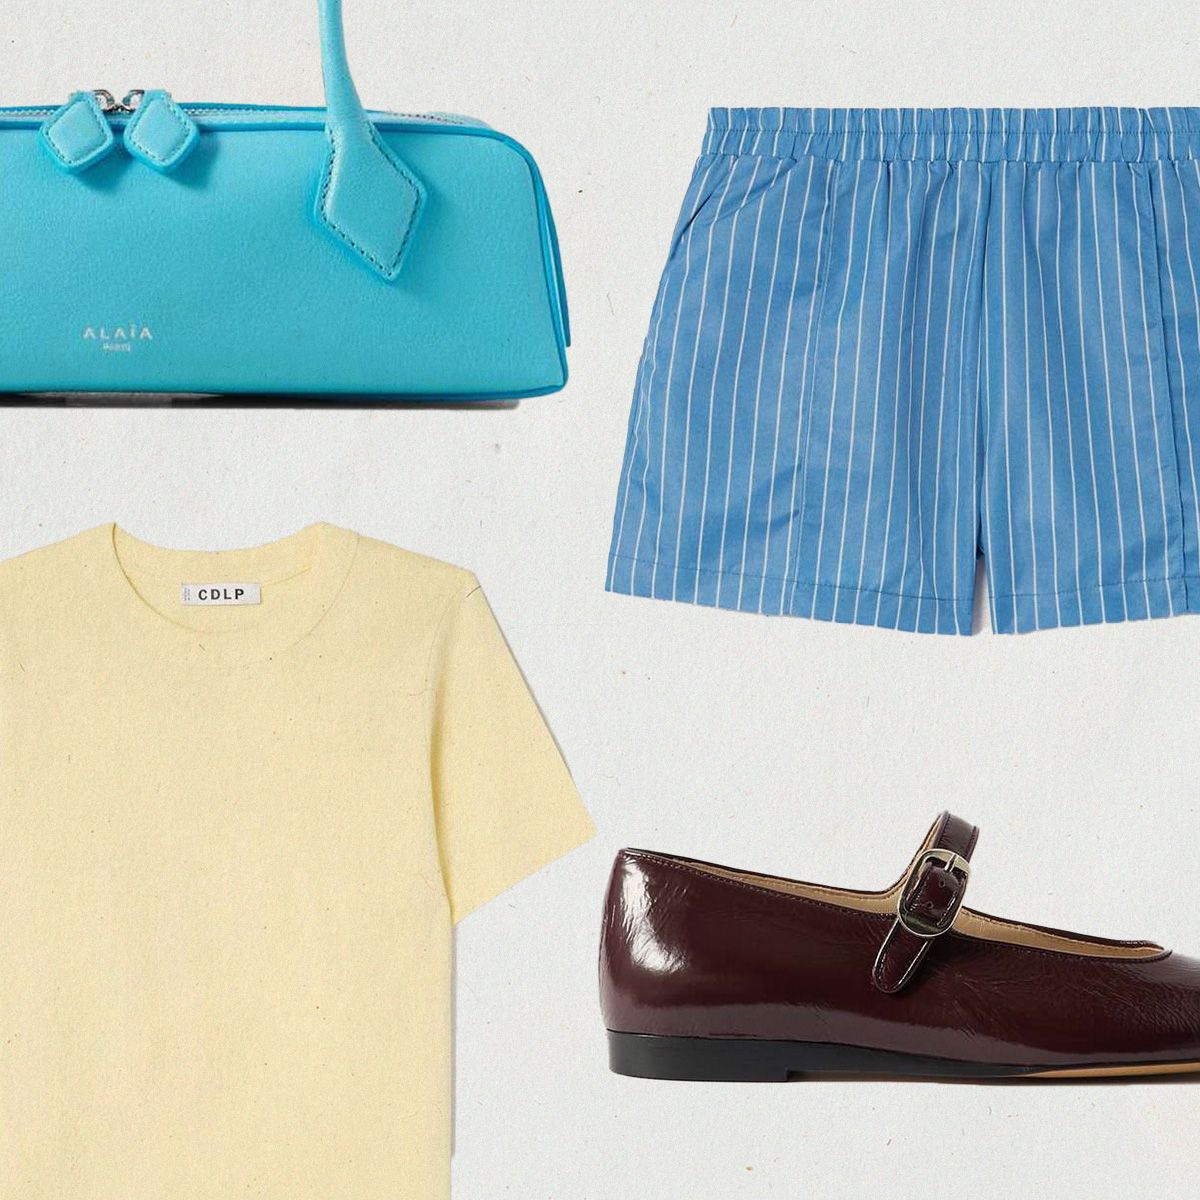 4 Summer Trends From Net-a-Porter I’m Keeping in My Closet